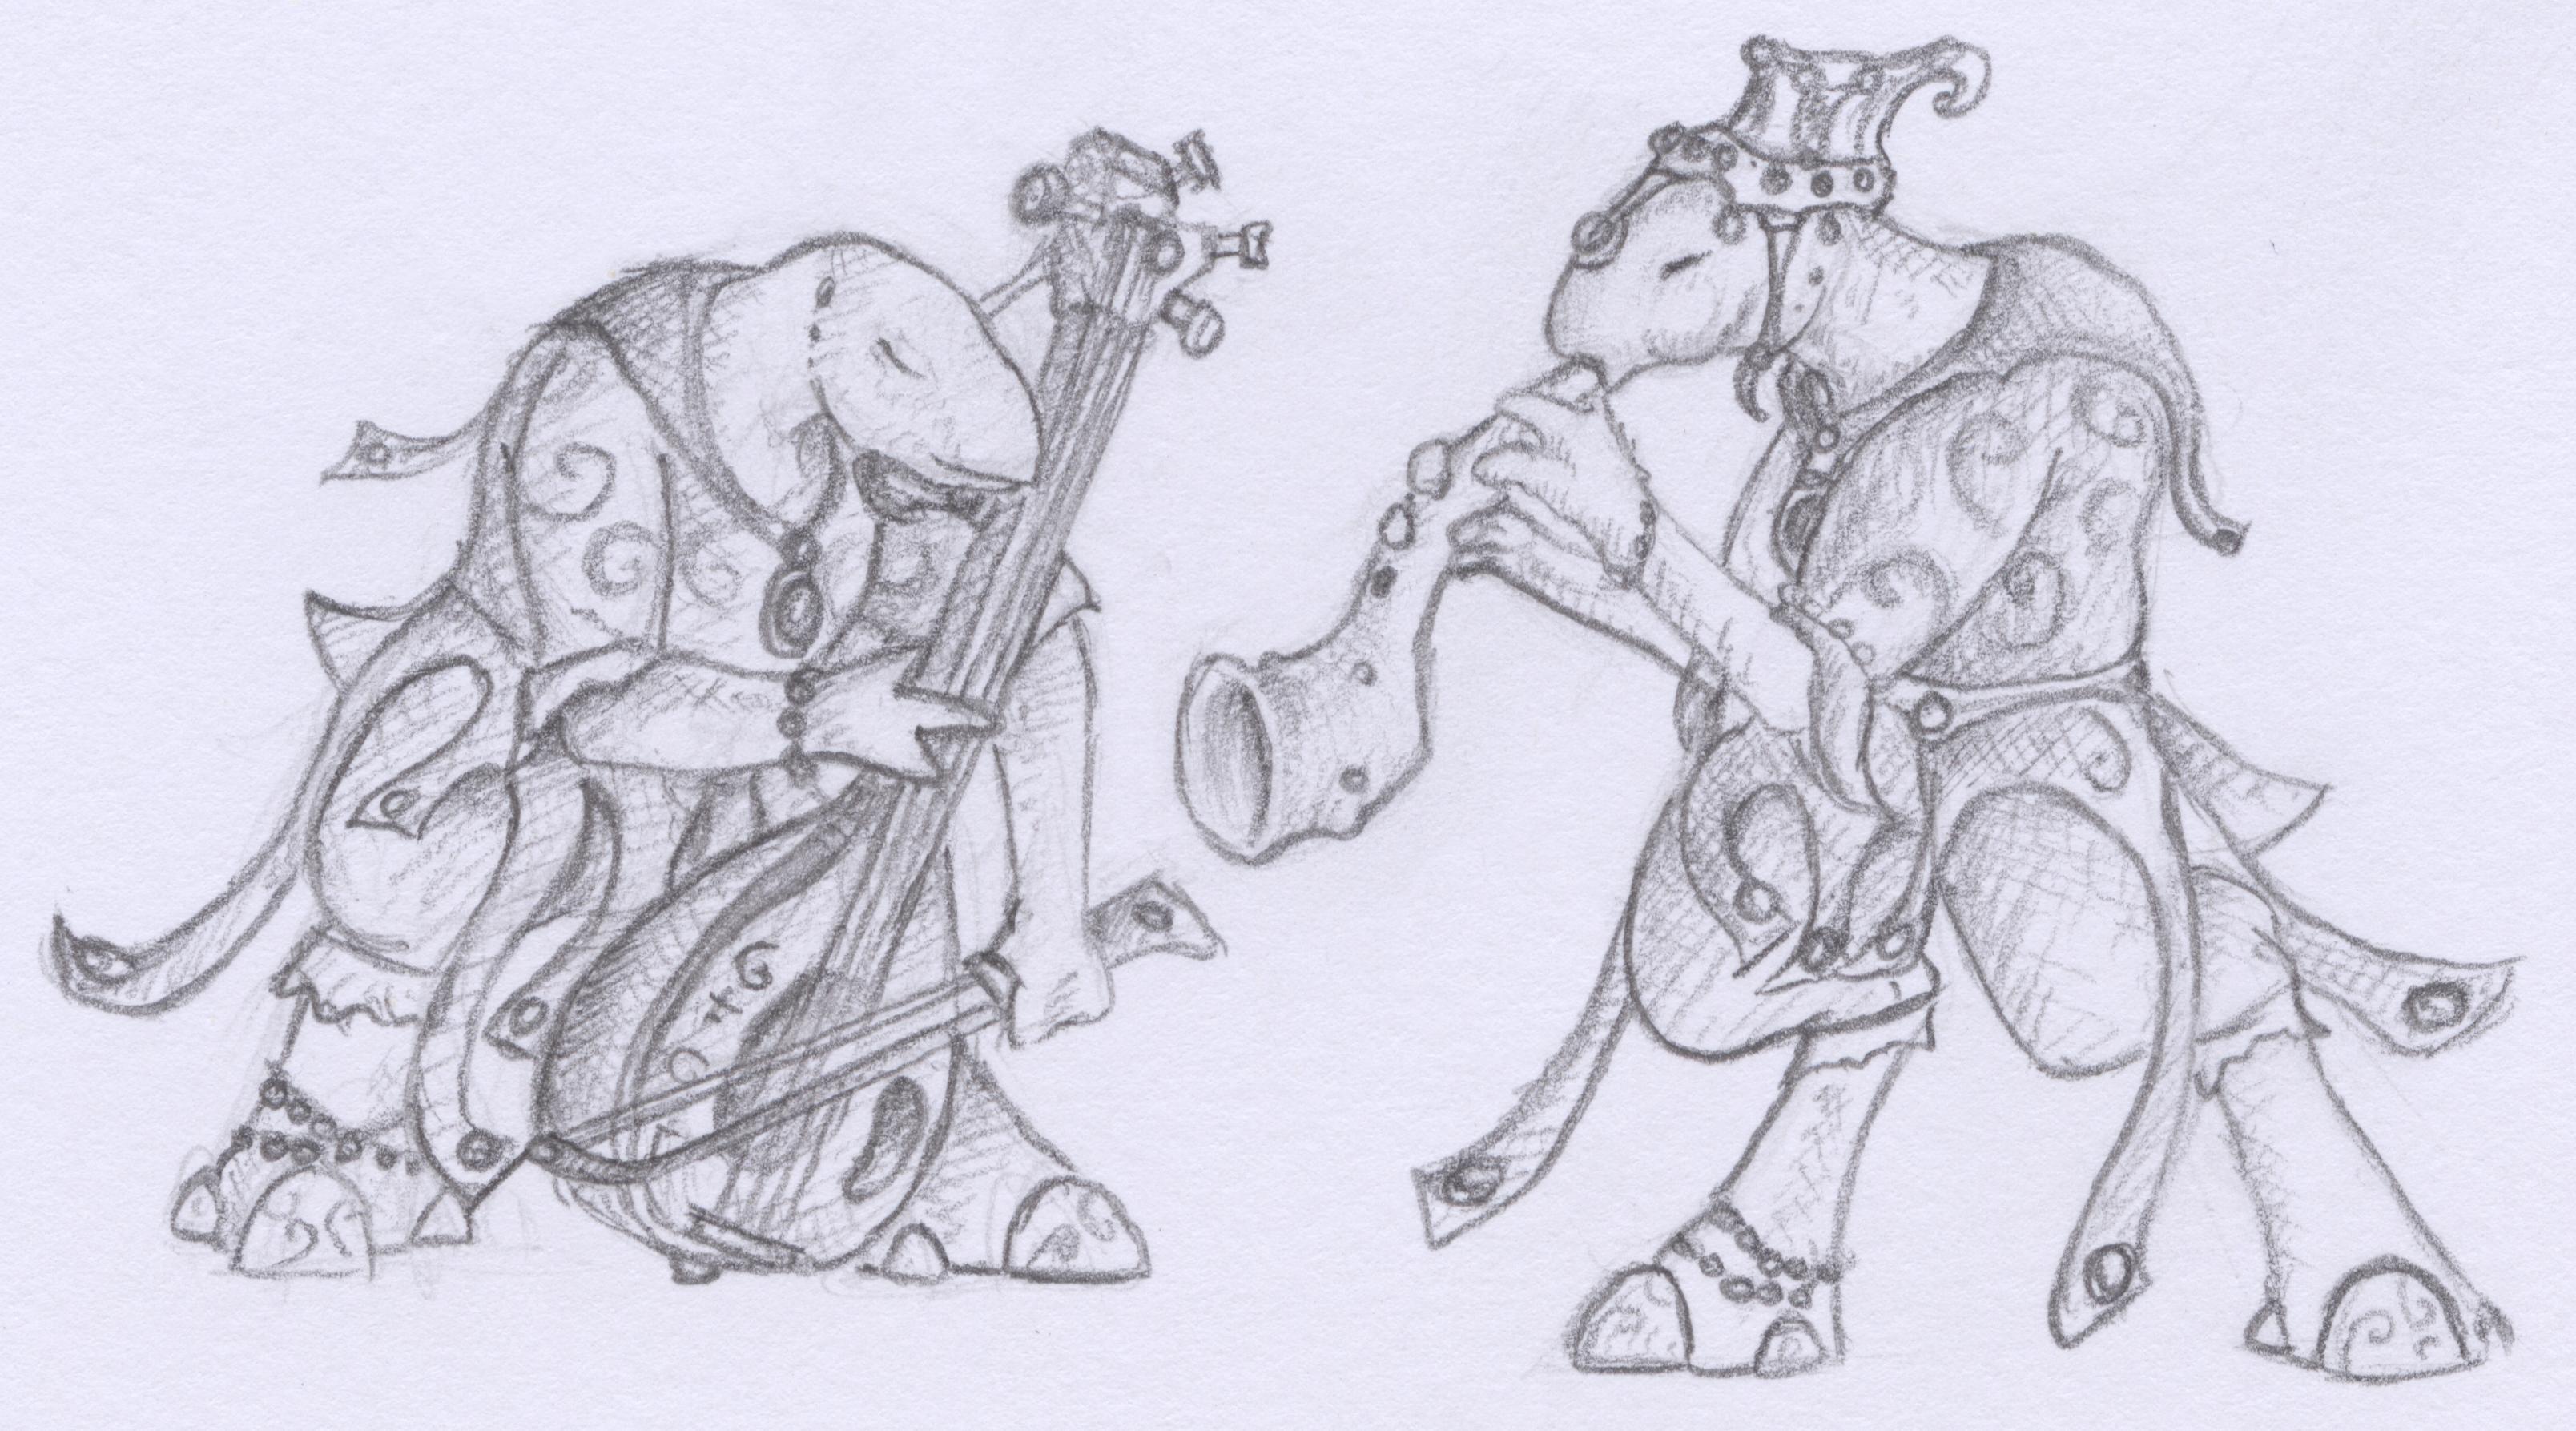 A couple of musicians